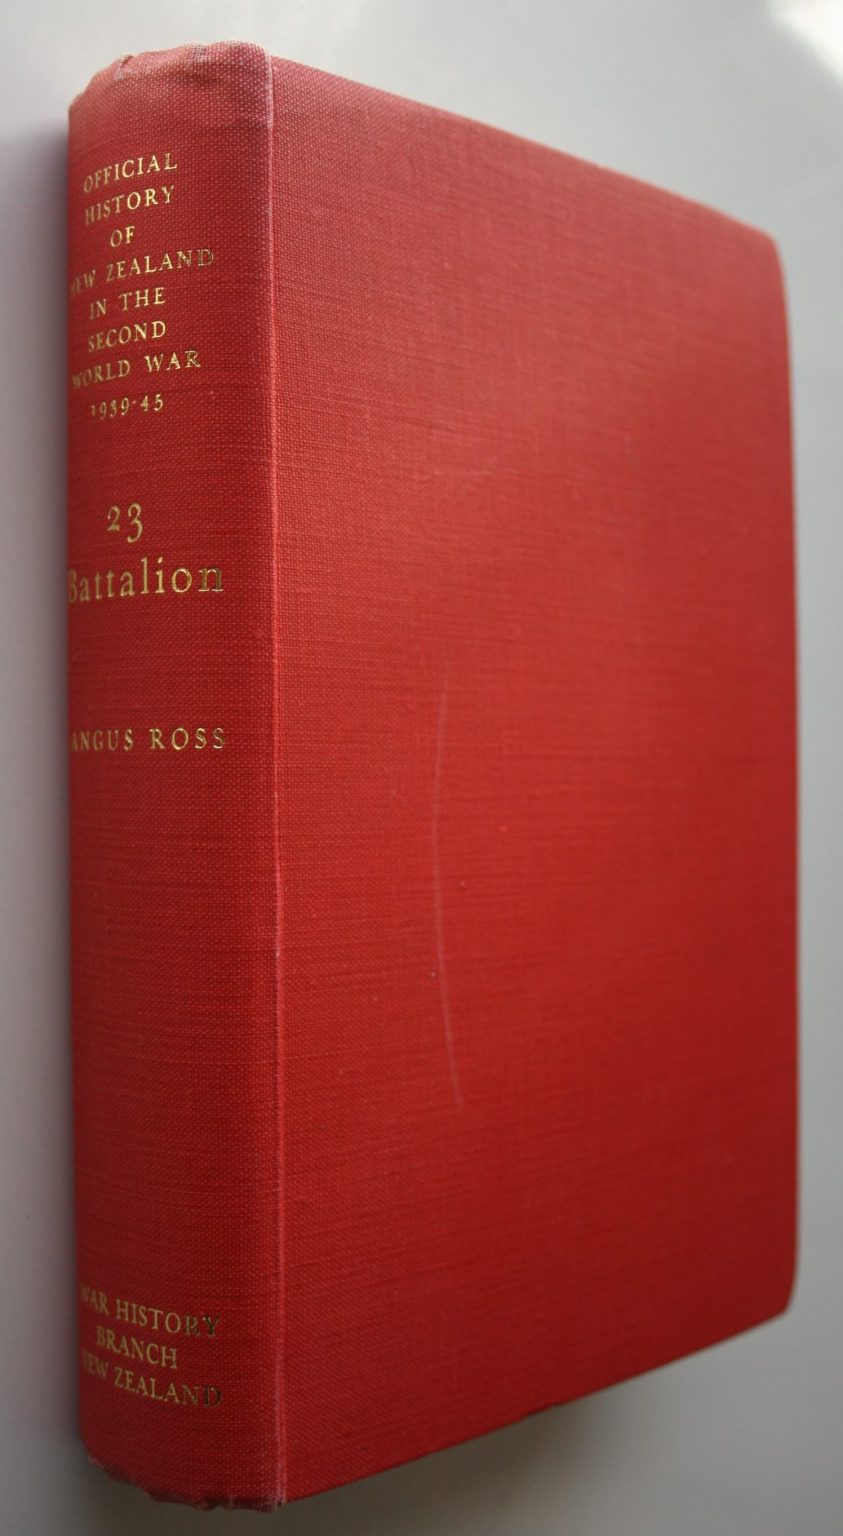 23 Battalion. Official History of New Zealand in the Second World War 1939-45. By Angus Ross.